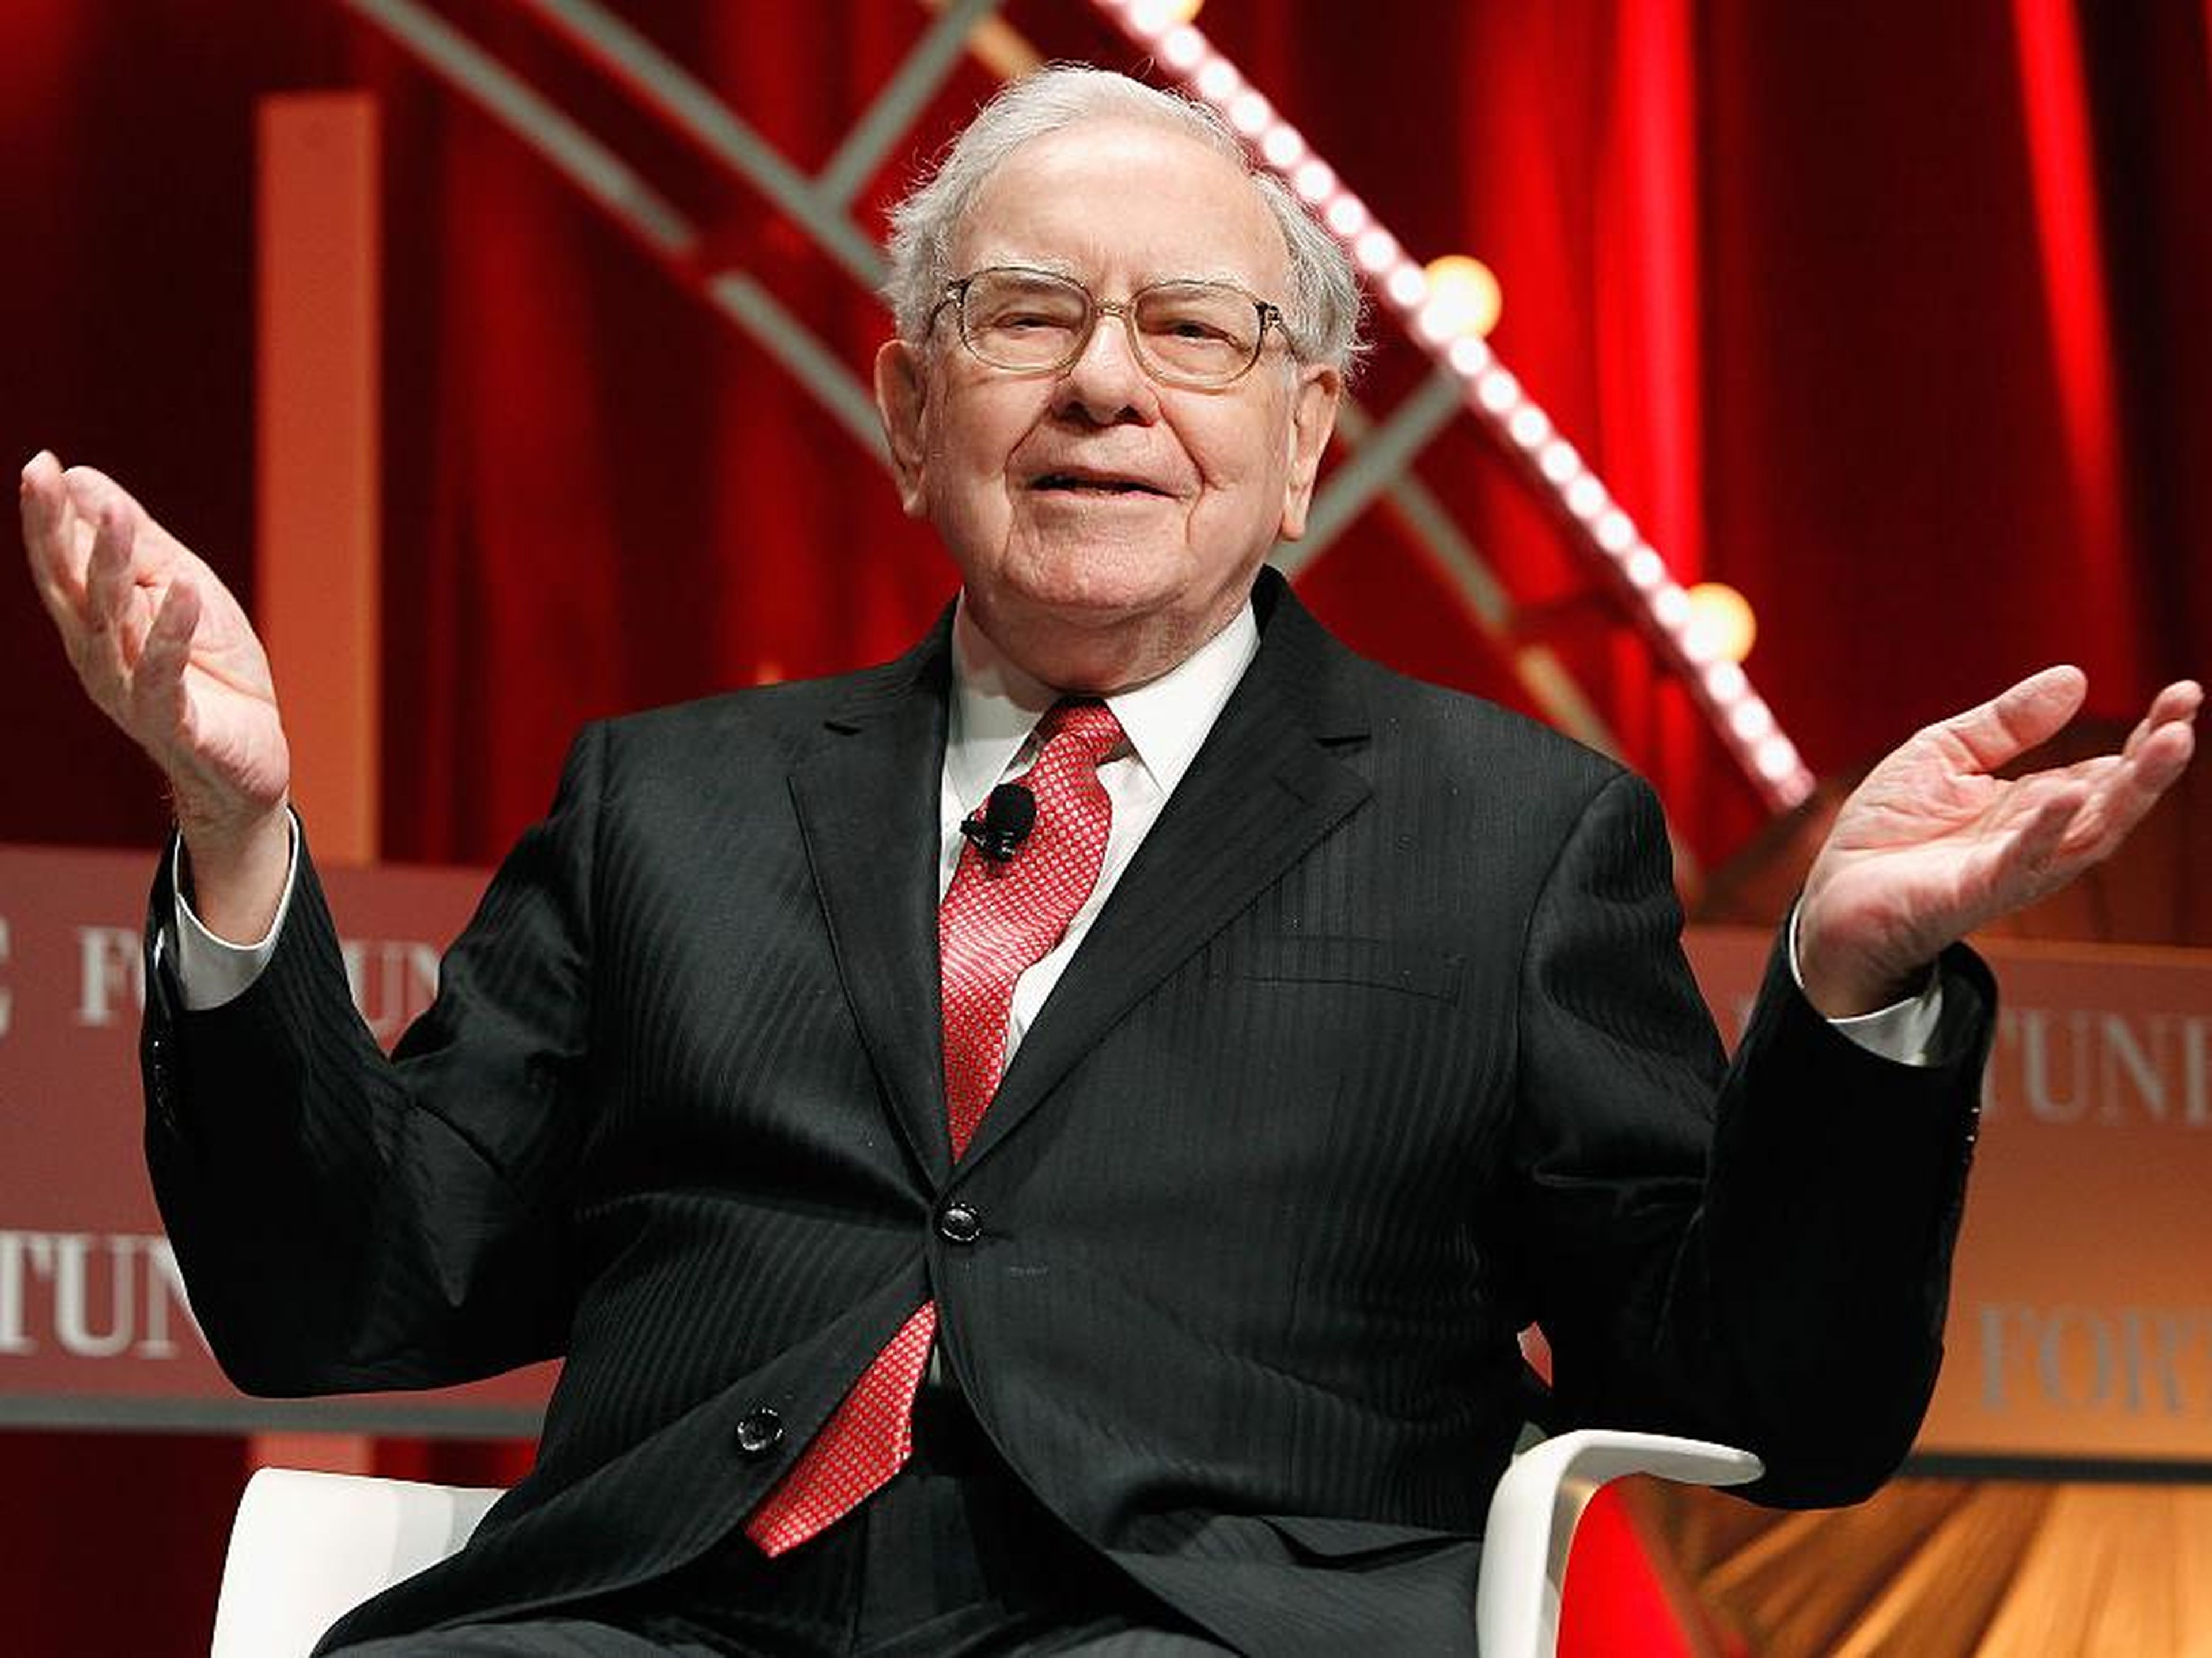 Warren Buffett made 12 predictions about bitcoin, table tennis, and his death — here's how they turned out